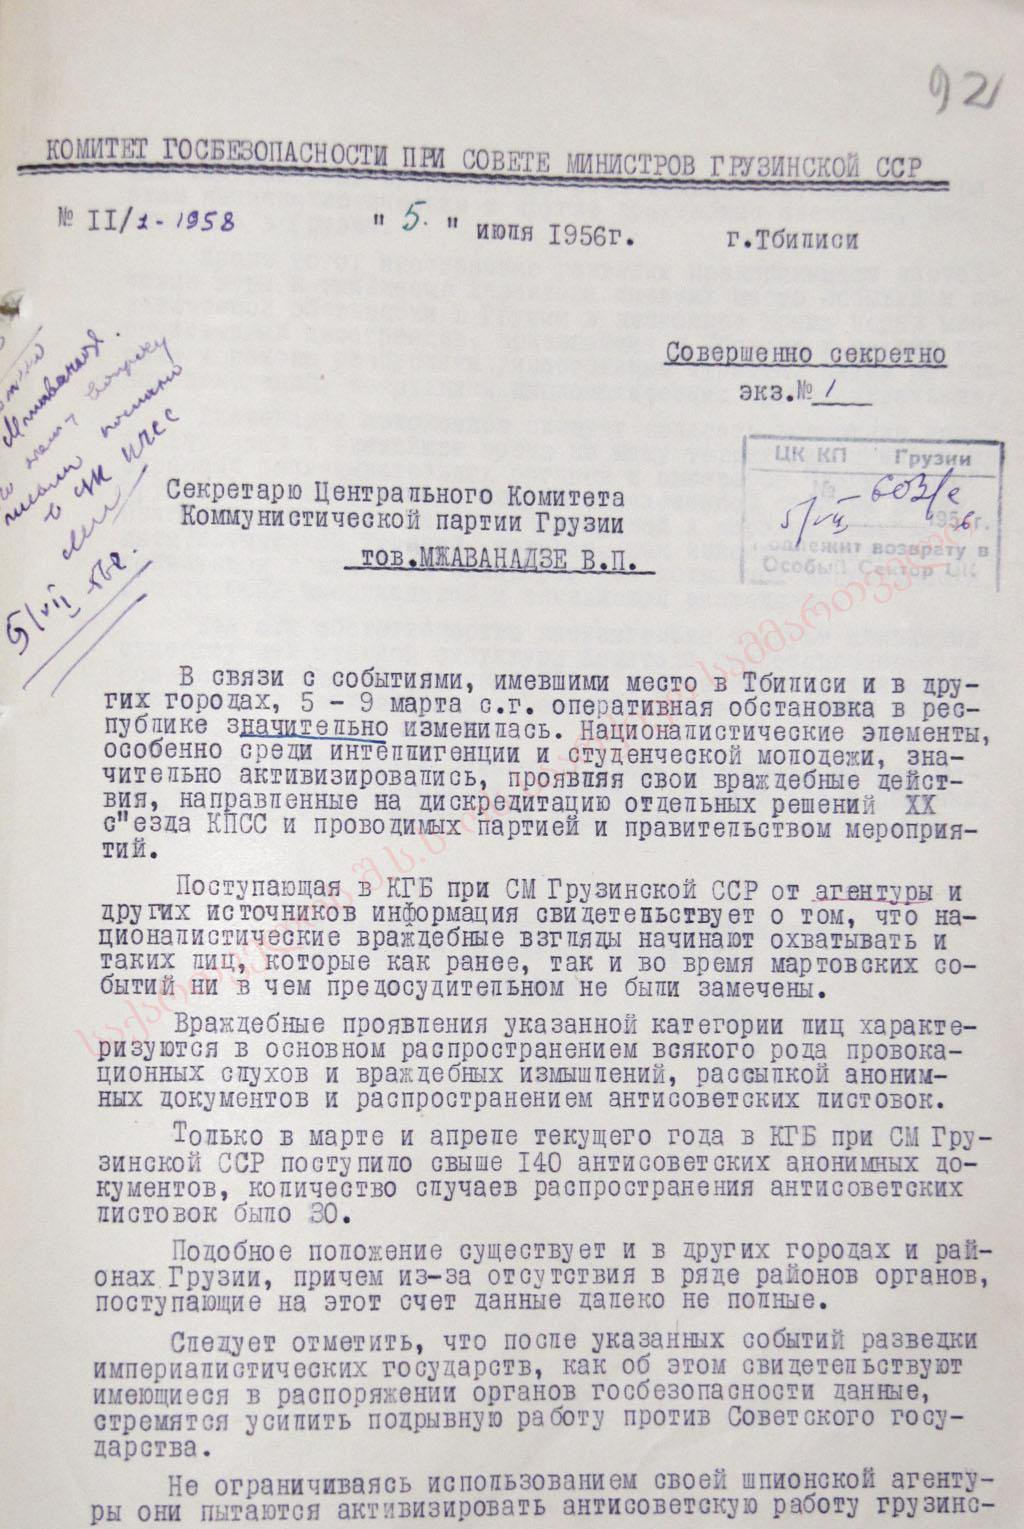 Information sent by the Chairman of the Committee of State Security (KGB) at the Council of Ministers of Georgia to the First Secretary of the Central Committee of Communist Party of Georgia Vasil Pavlovich Mzhavanadze, regarding the increase of the nationalistic and anti-Soviet attitude in the Georgian society after the events of March 1956. 